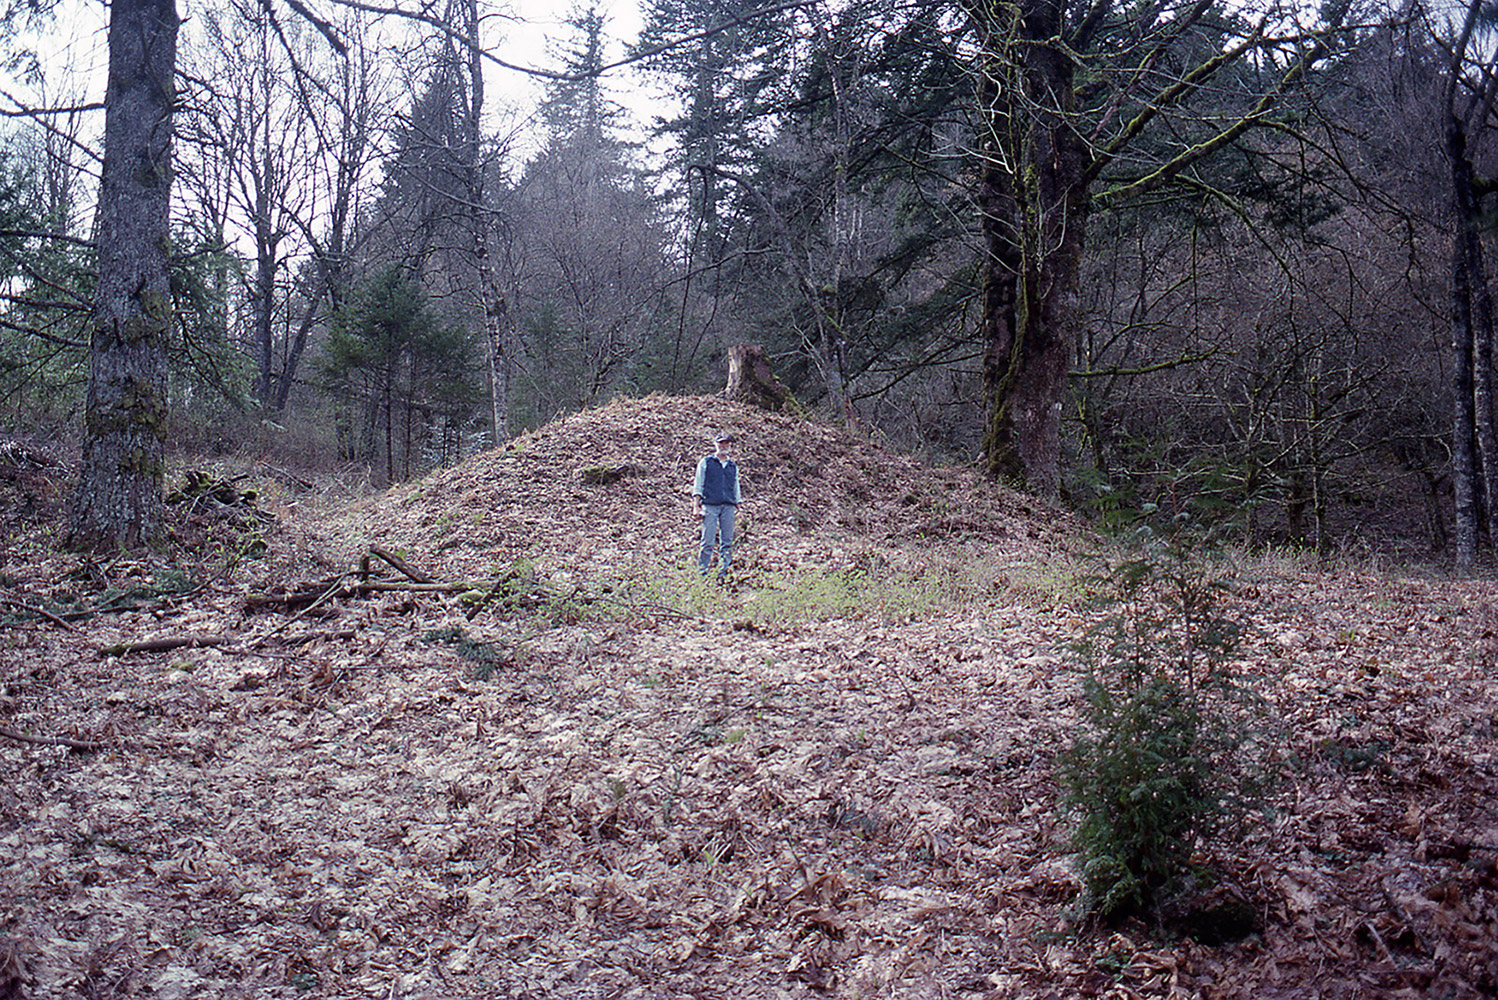 A man stands in front of an earthen mound covered in fallen leaves.